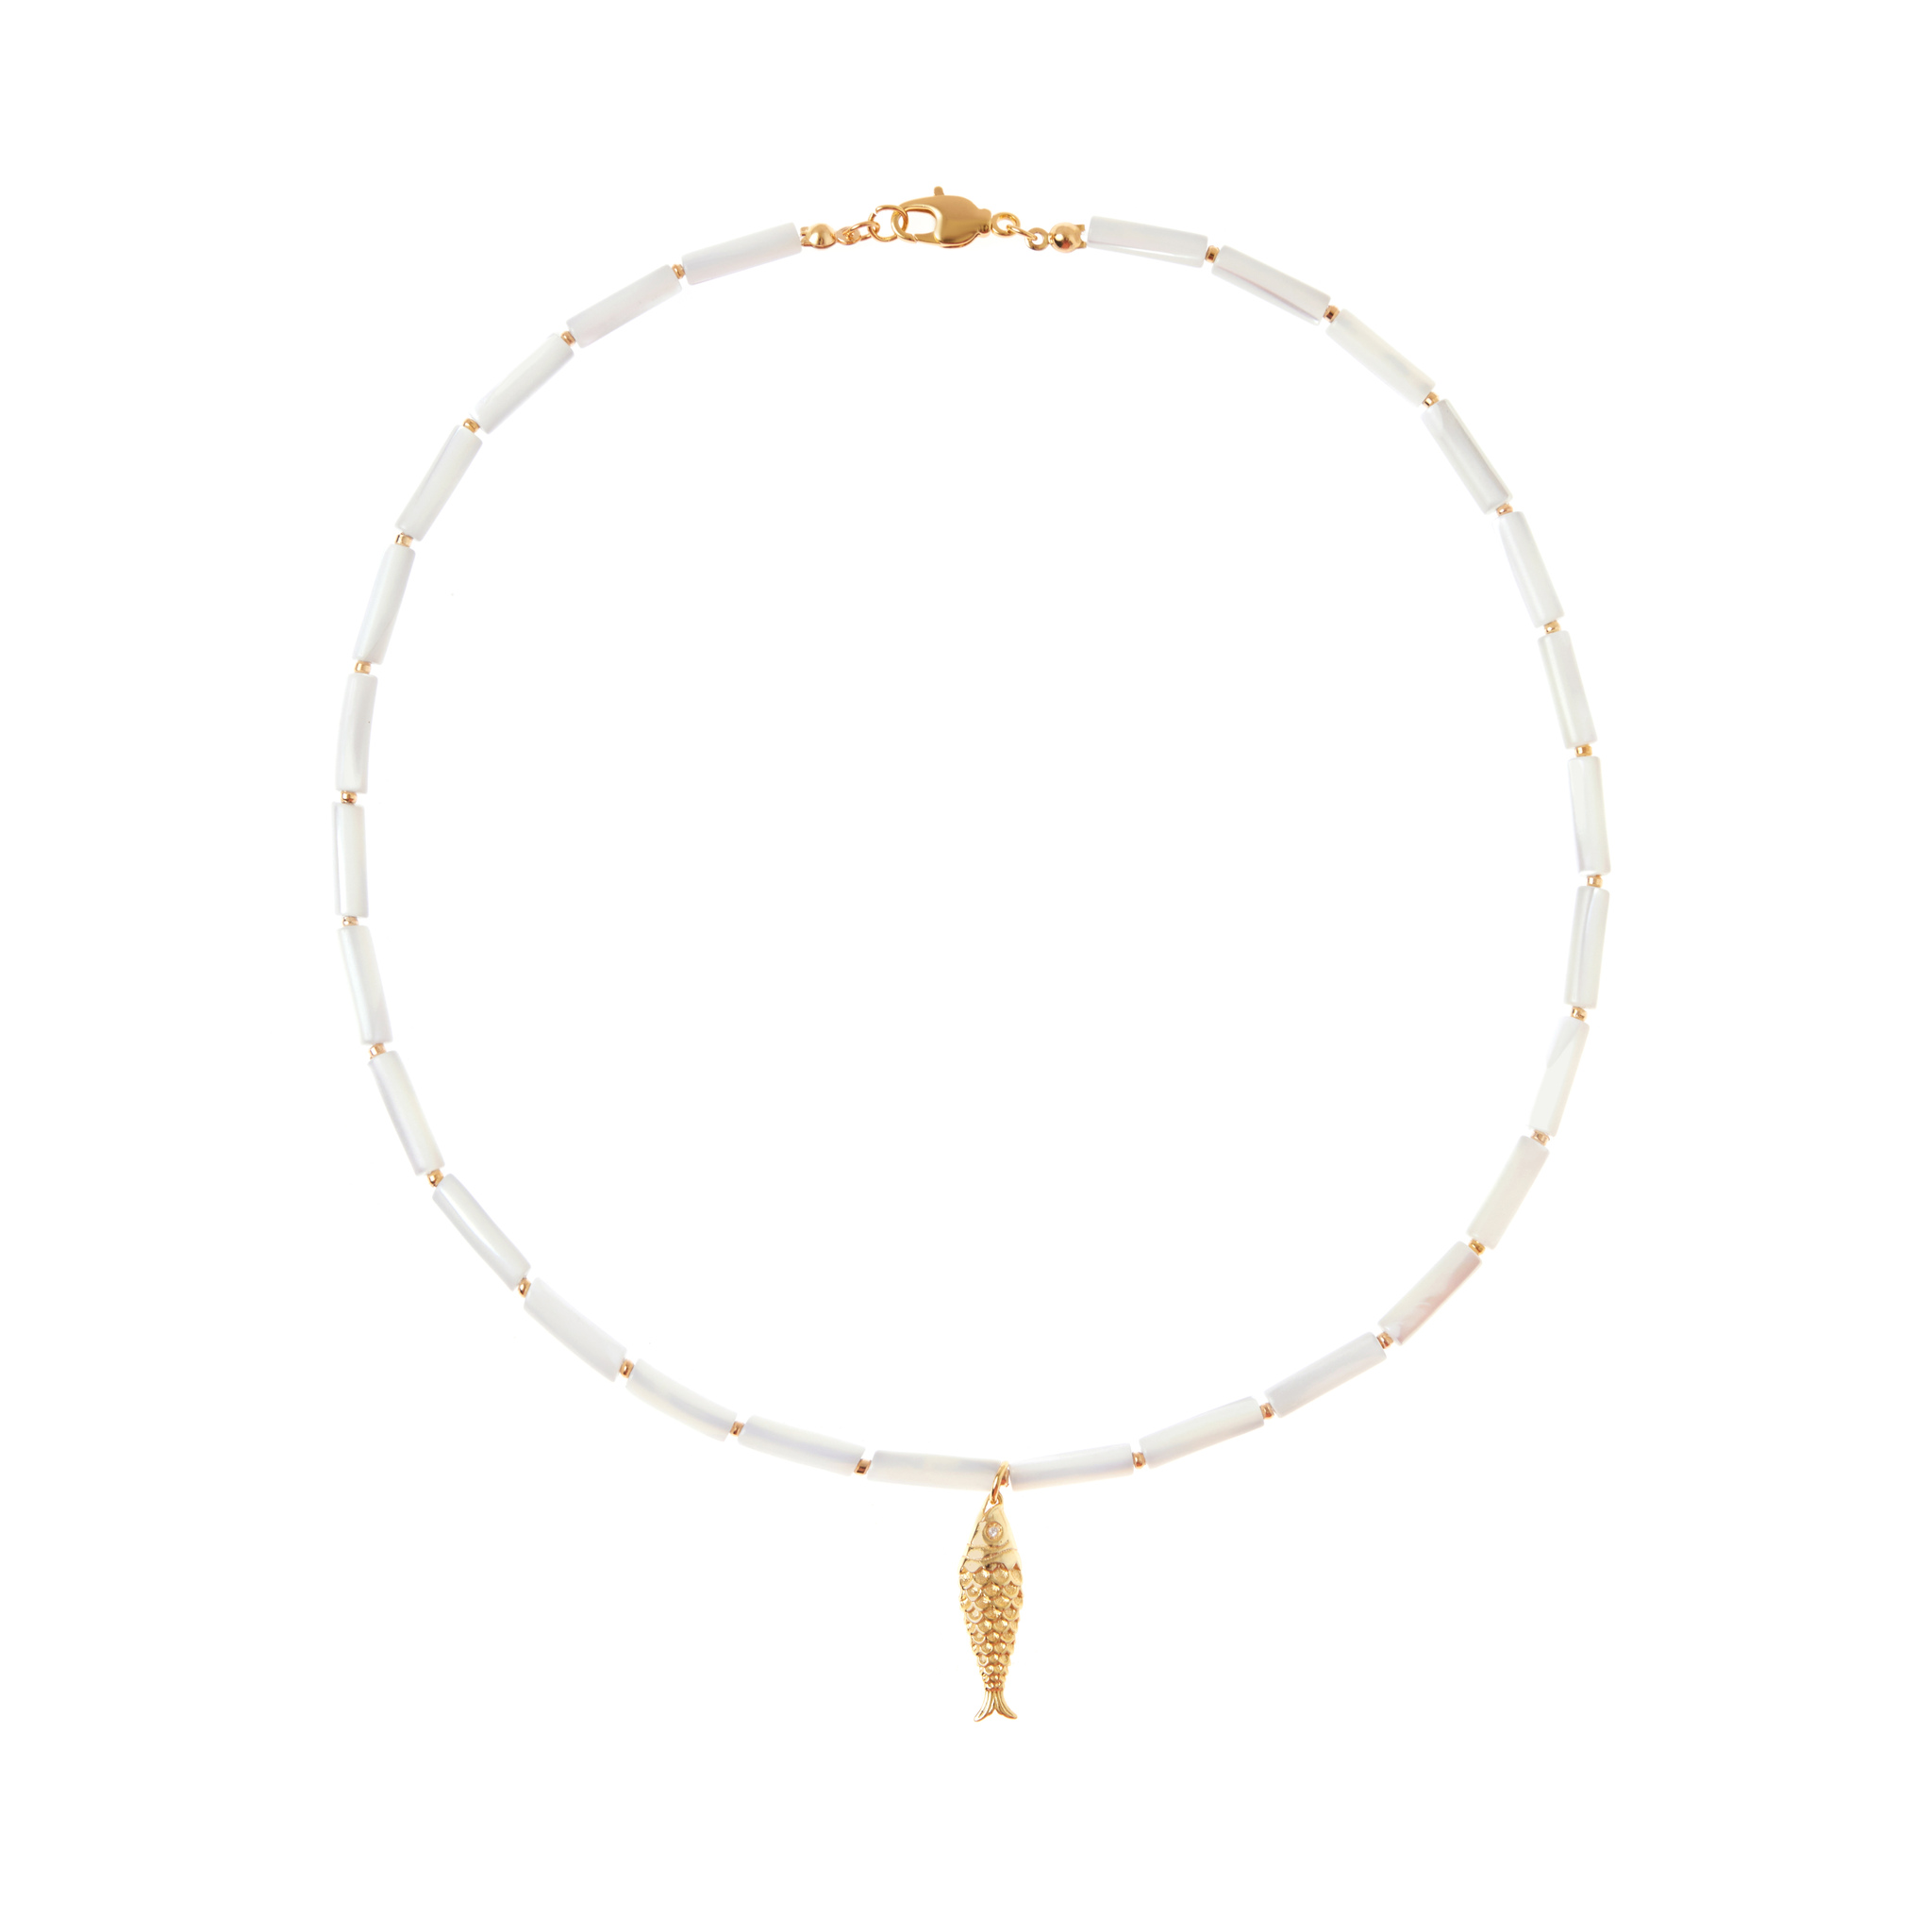 HOLLY JUNE Колье Gold Fish Tube Necklace - Pearl holly june колье minor pearl twist necklace